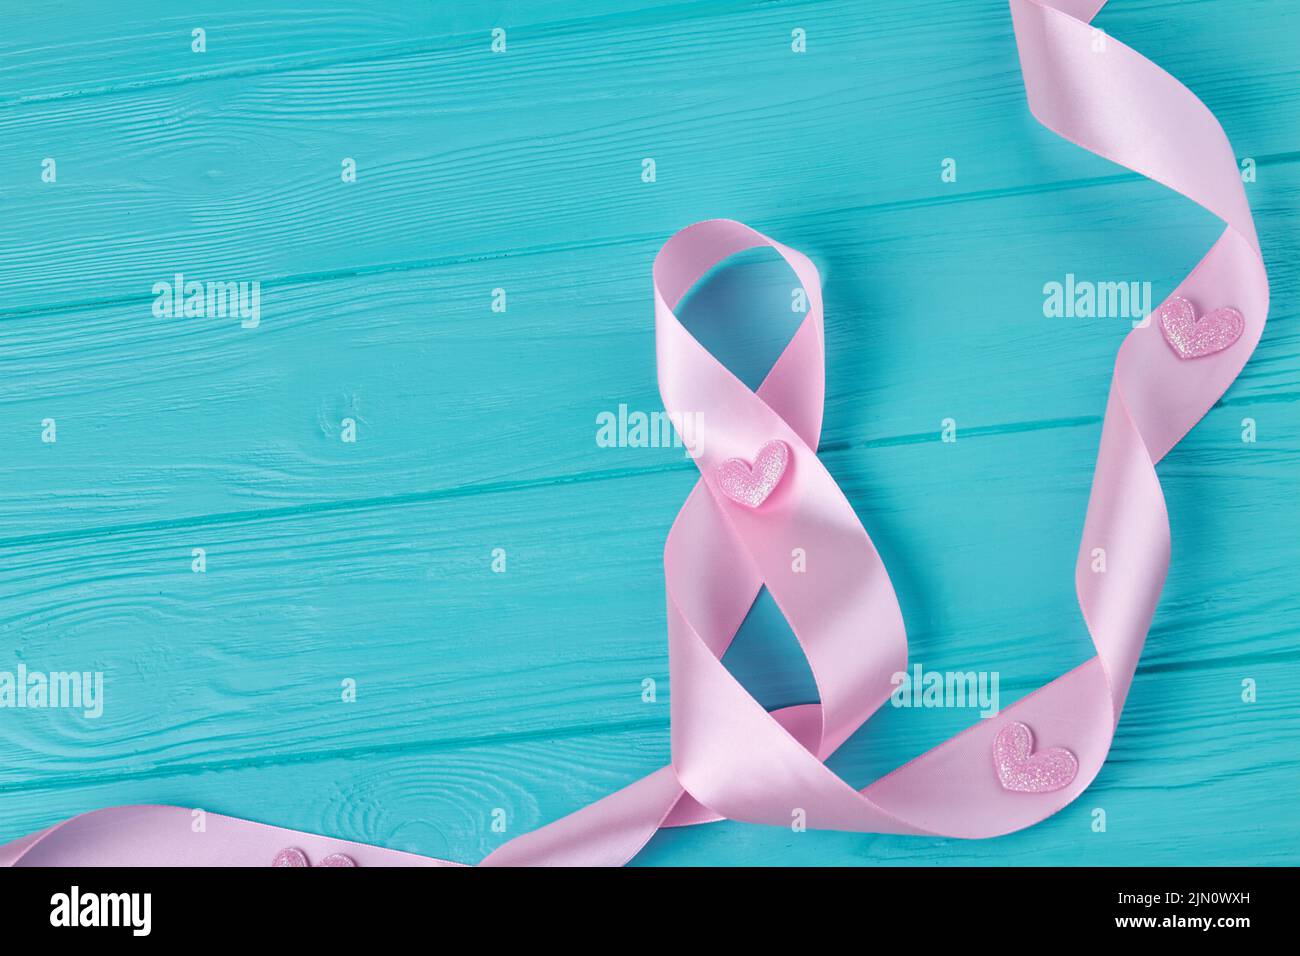 Pink ribbon tape on blue wooden desk. Happy women's day concept. Stock Photo